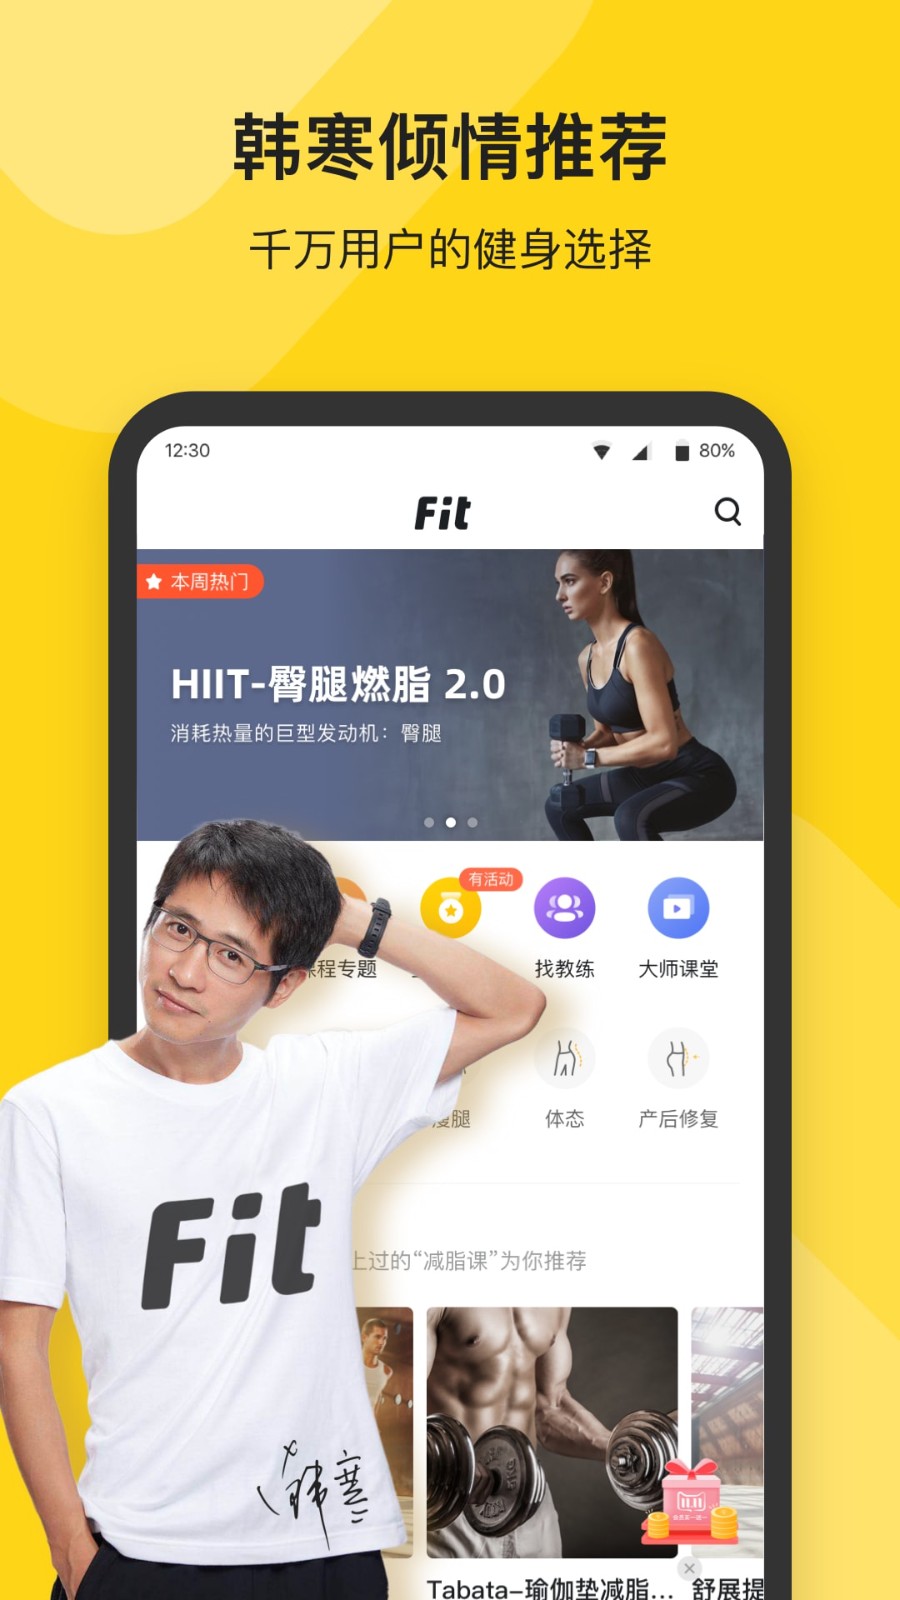 Fitapp